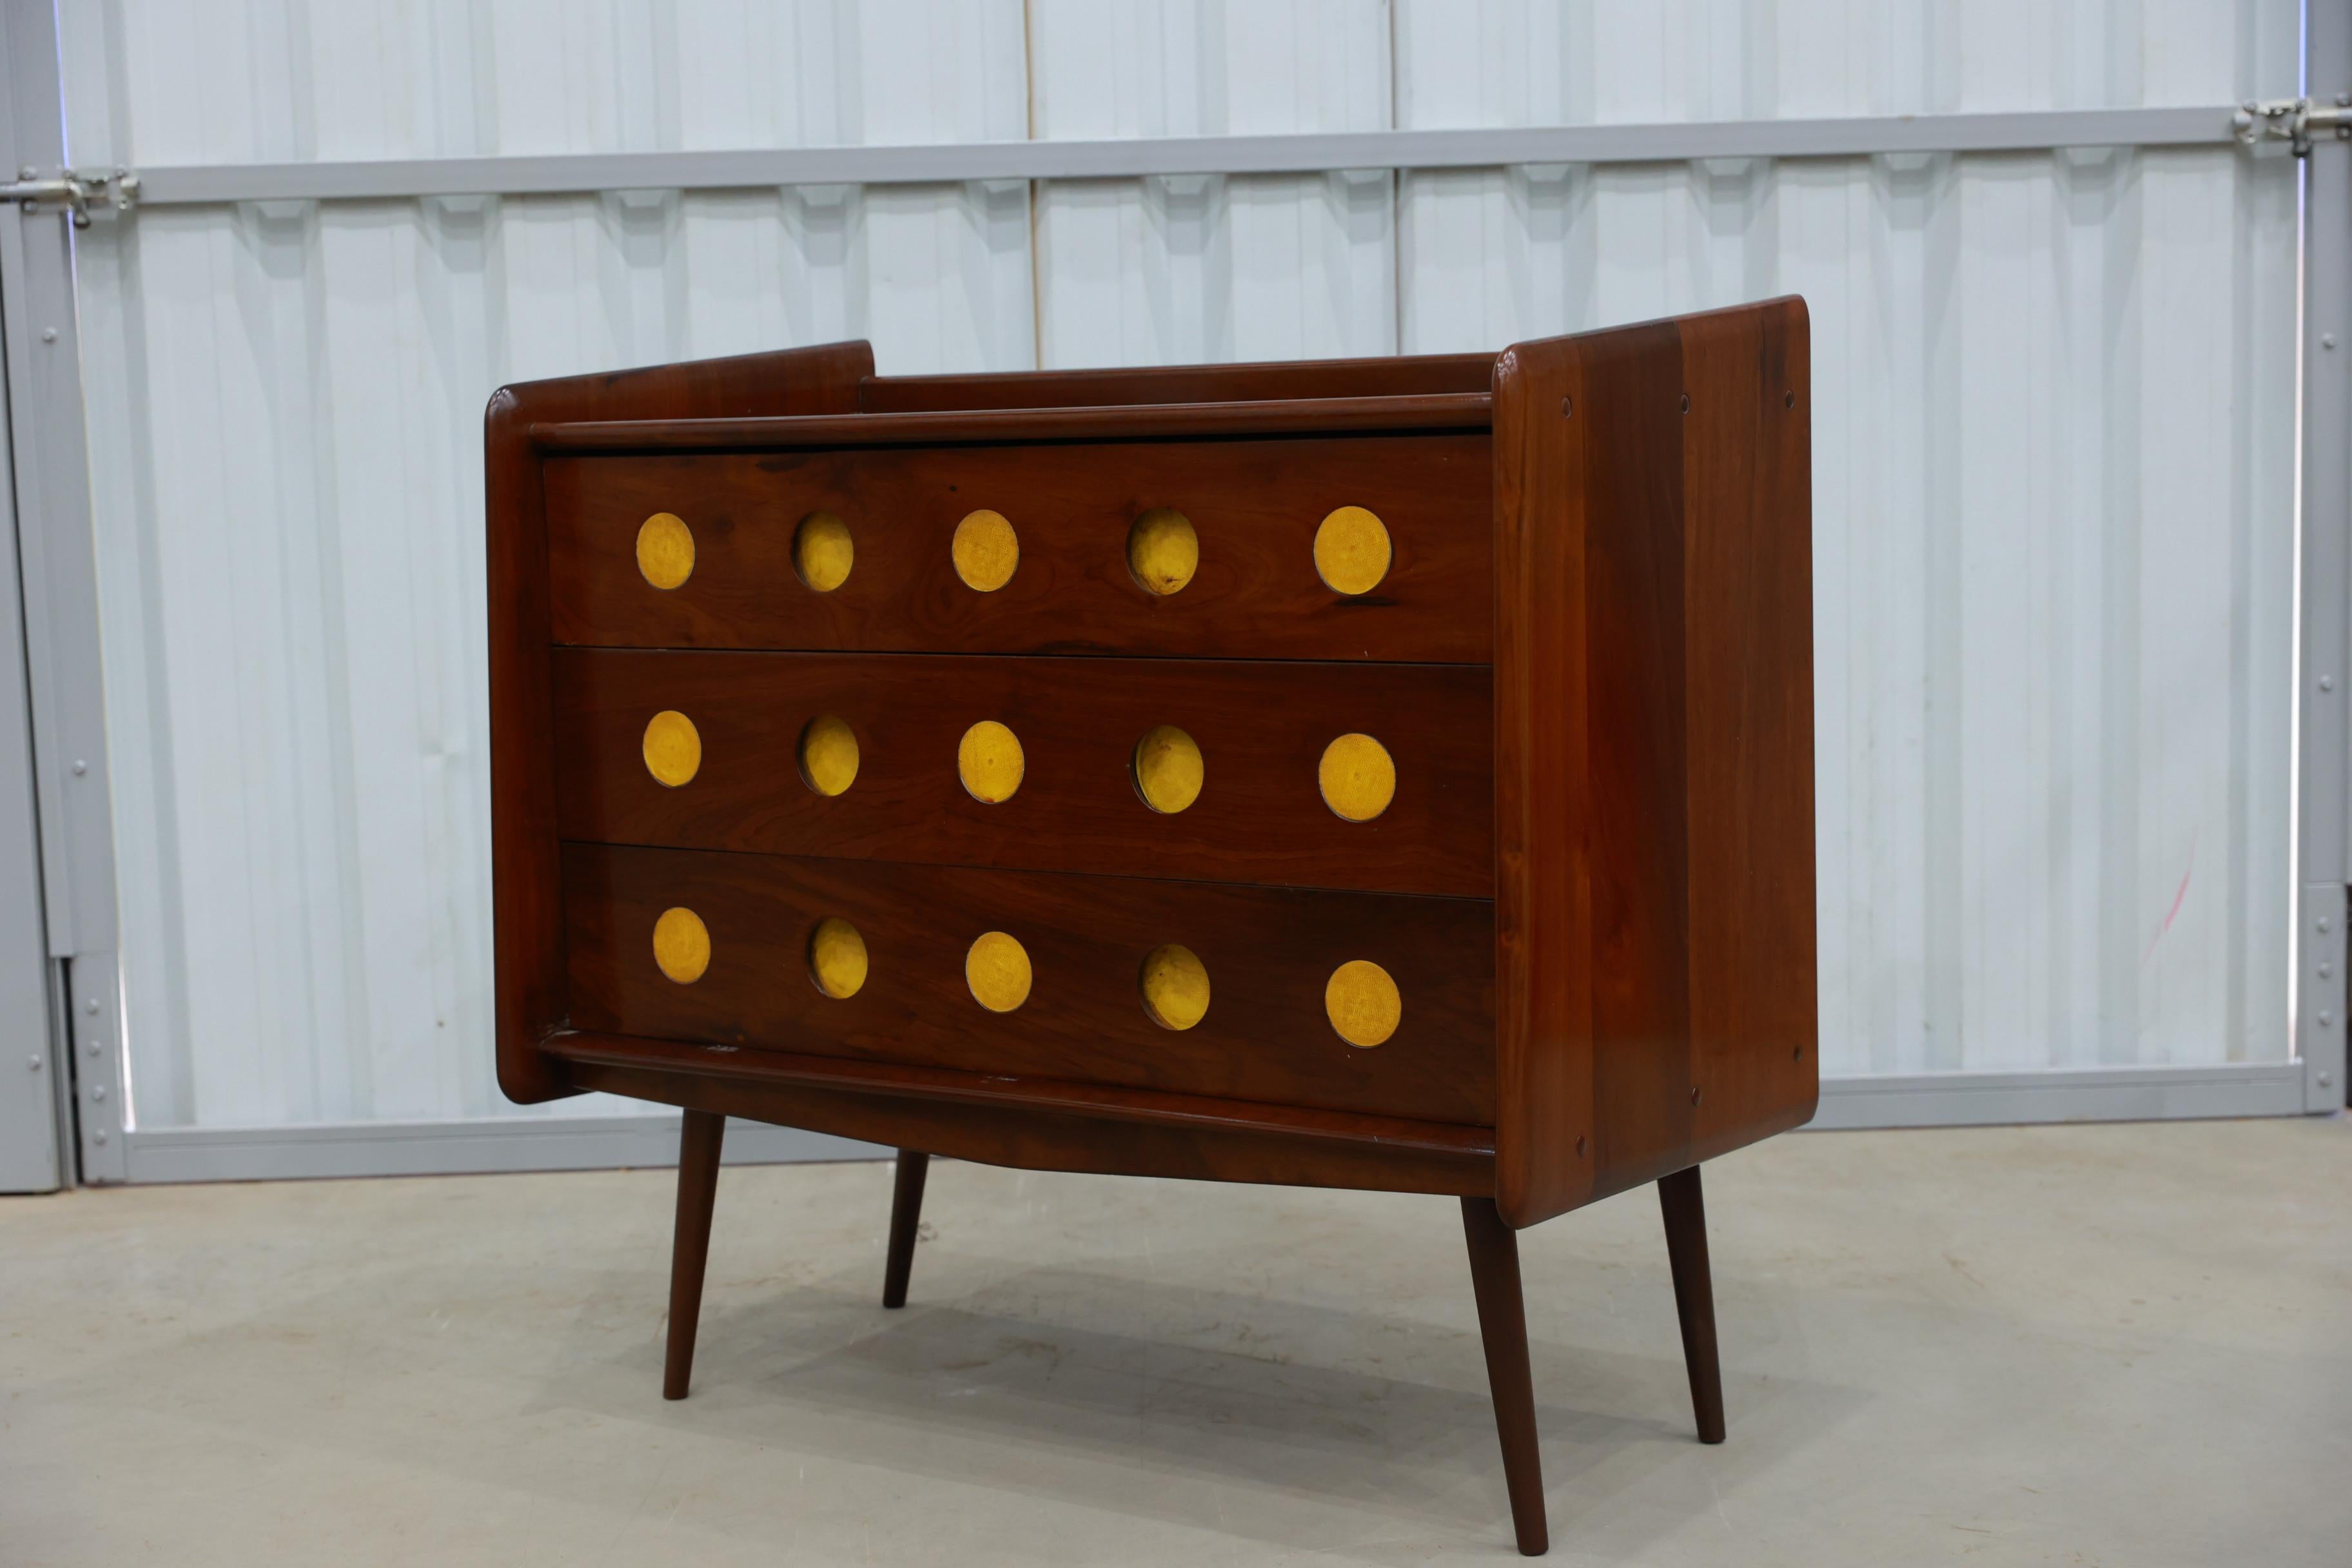 Brazilian Modern Chest of Drawers in Hardwood by Moveis Cimo, 1950s, Brazil In Good Condition For Sale In New York, NY